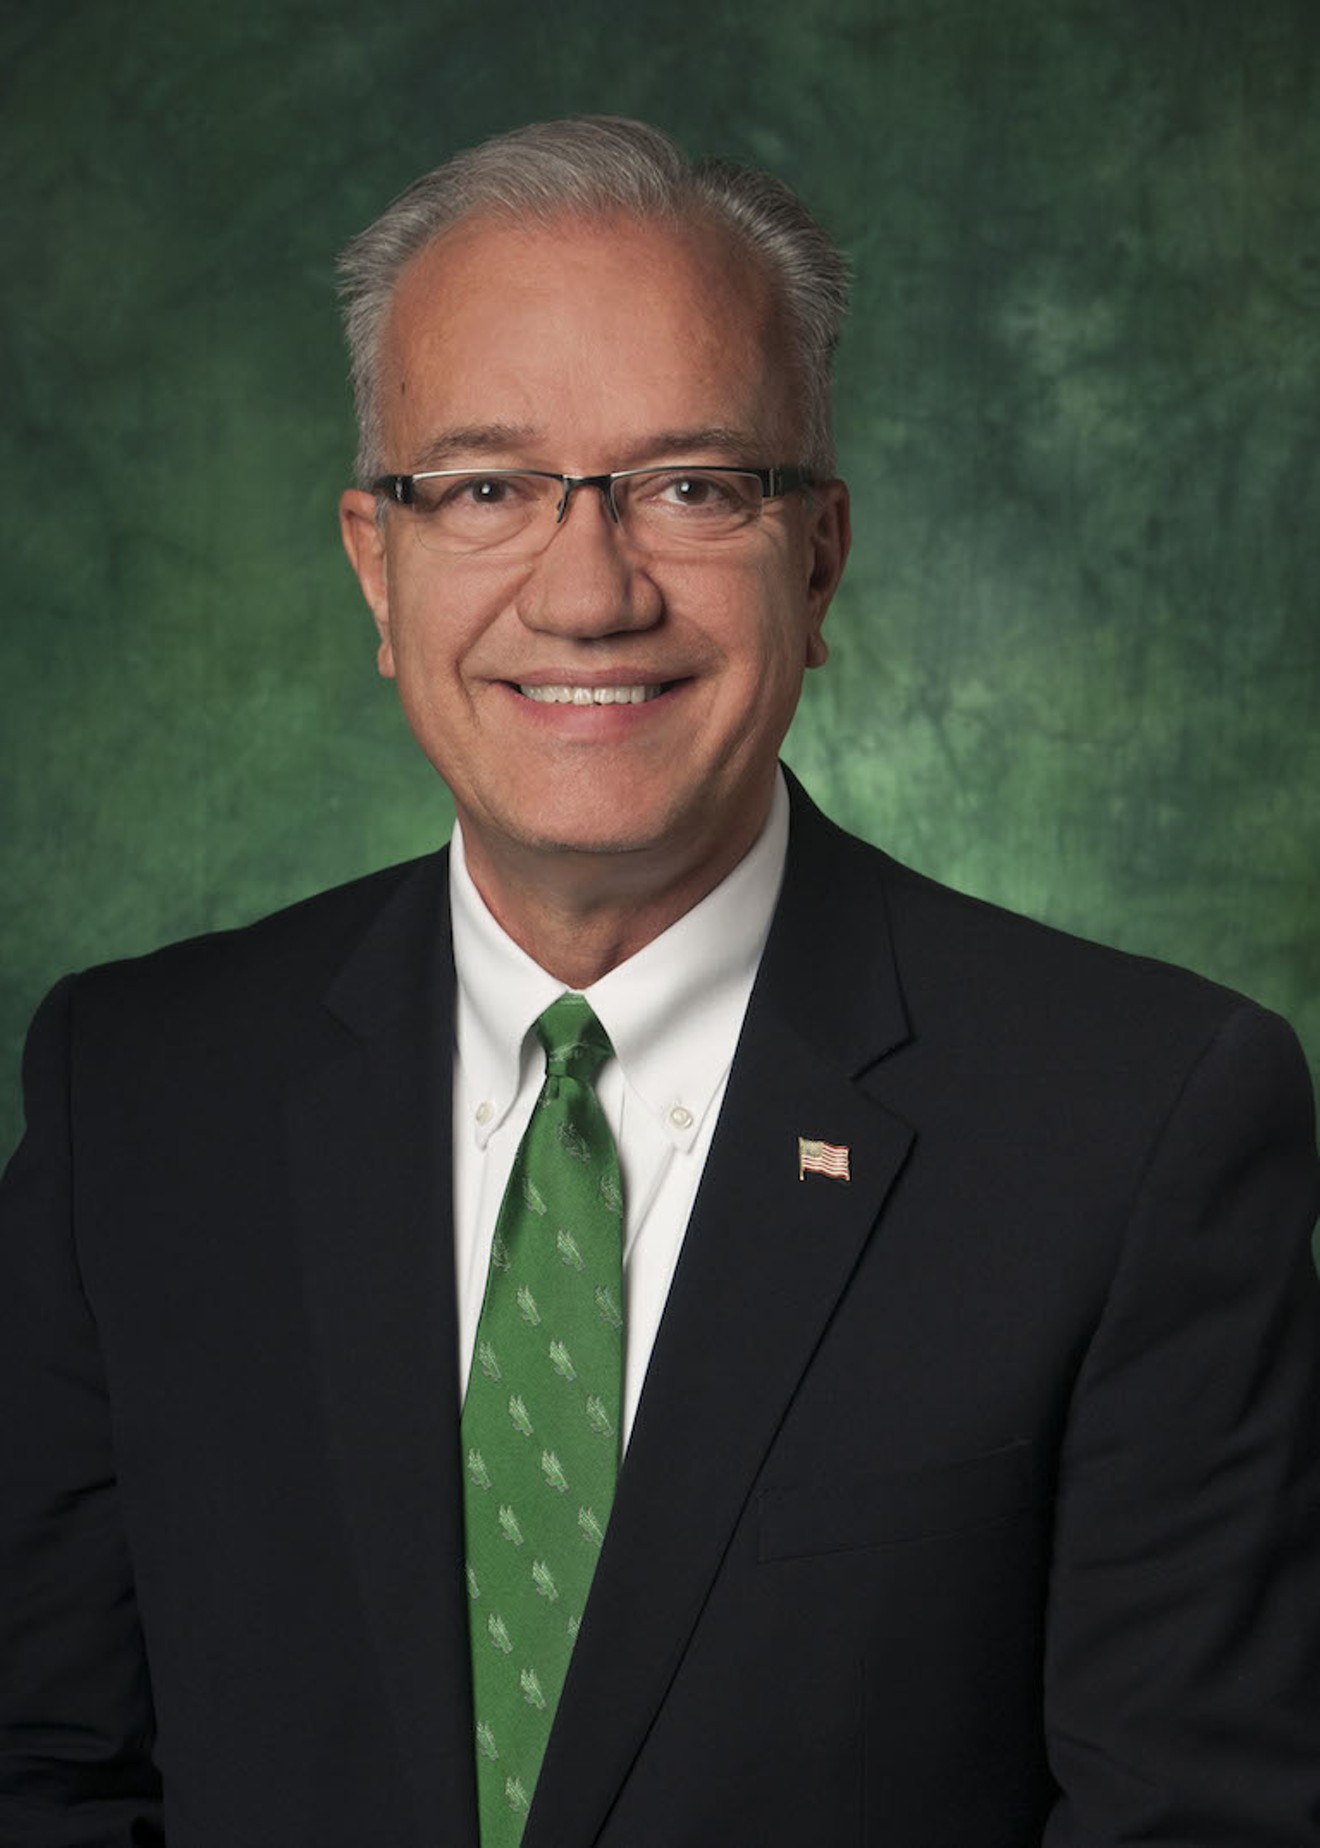 John Richmond took over as the Dean of the College of Music at the University of North Texas last May.